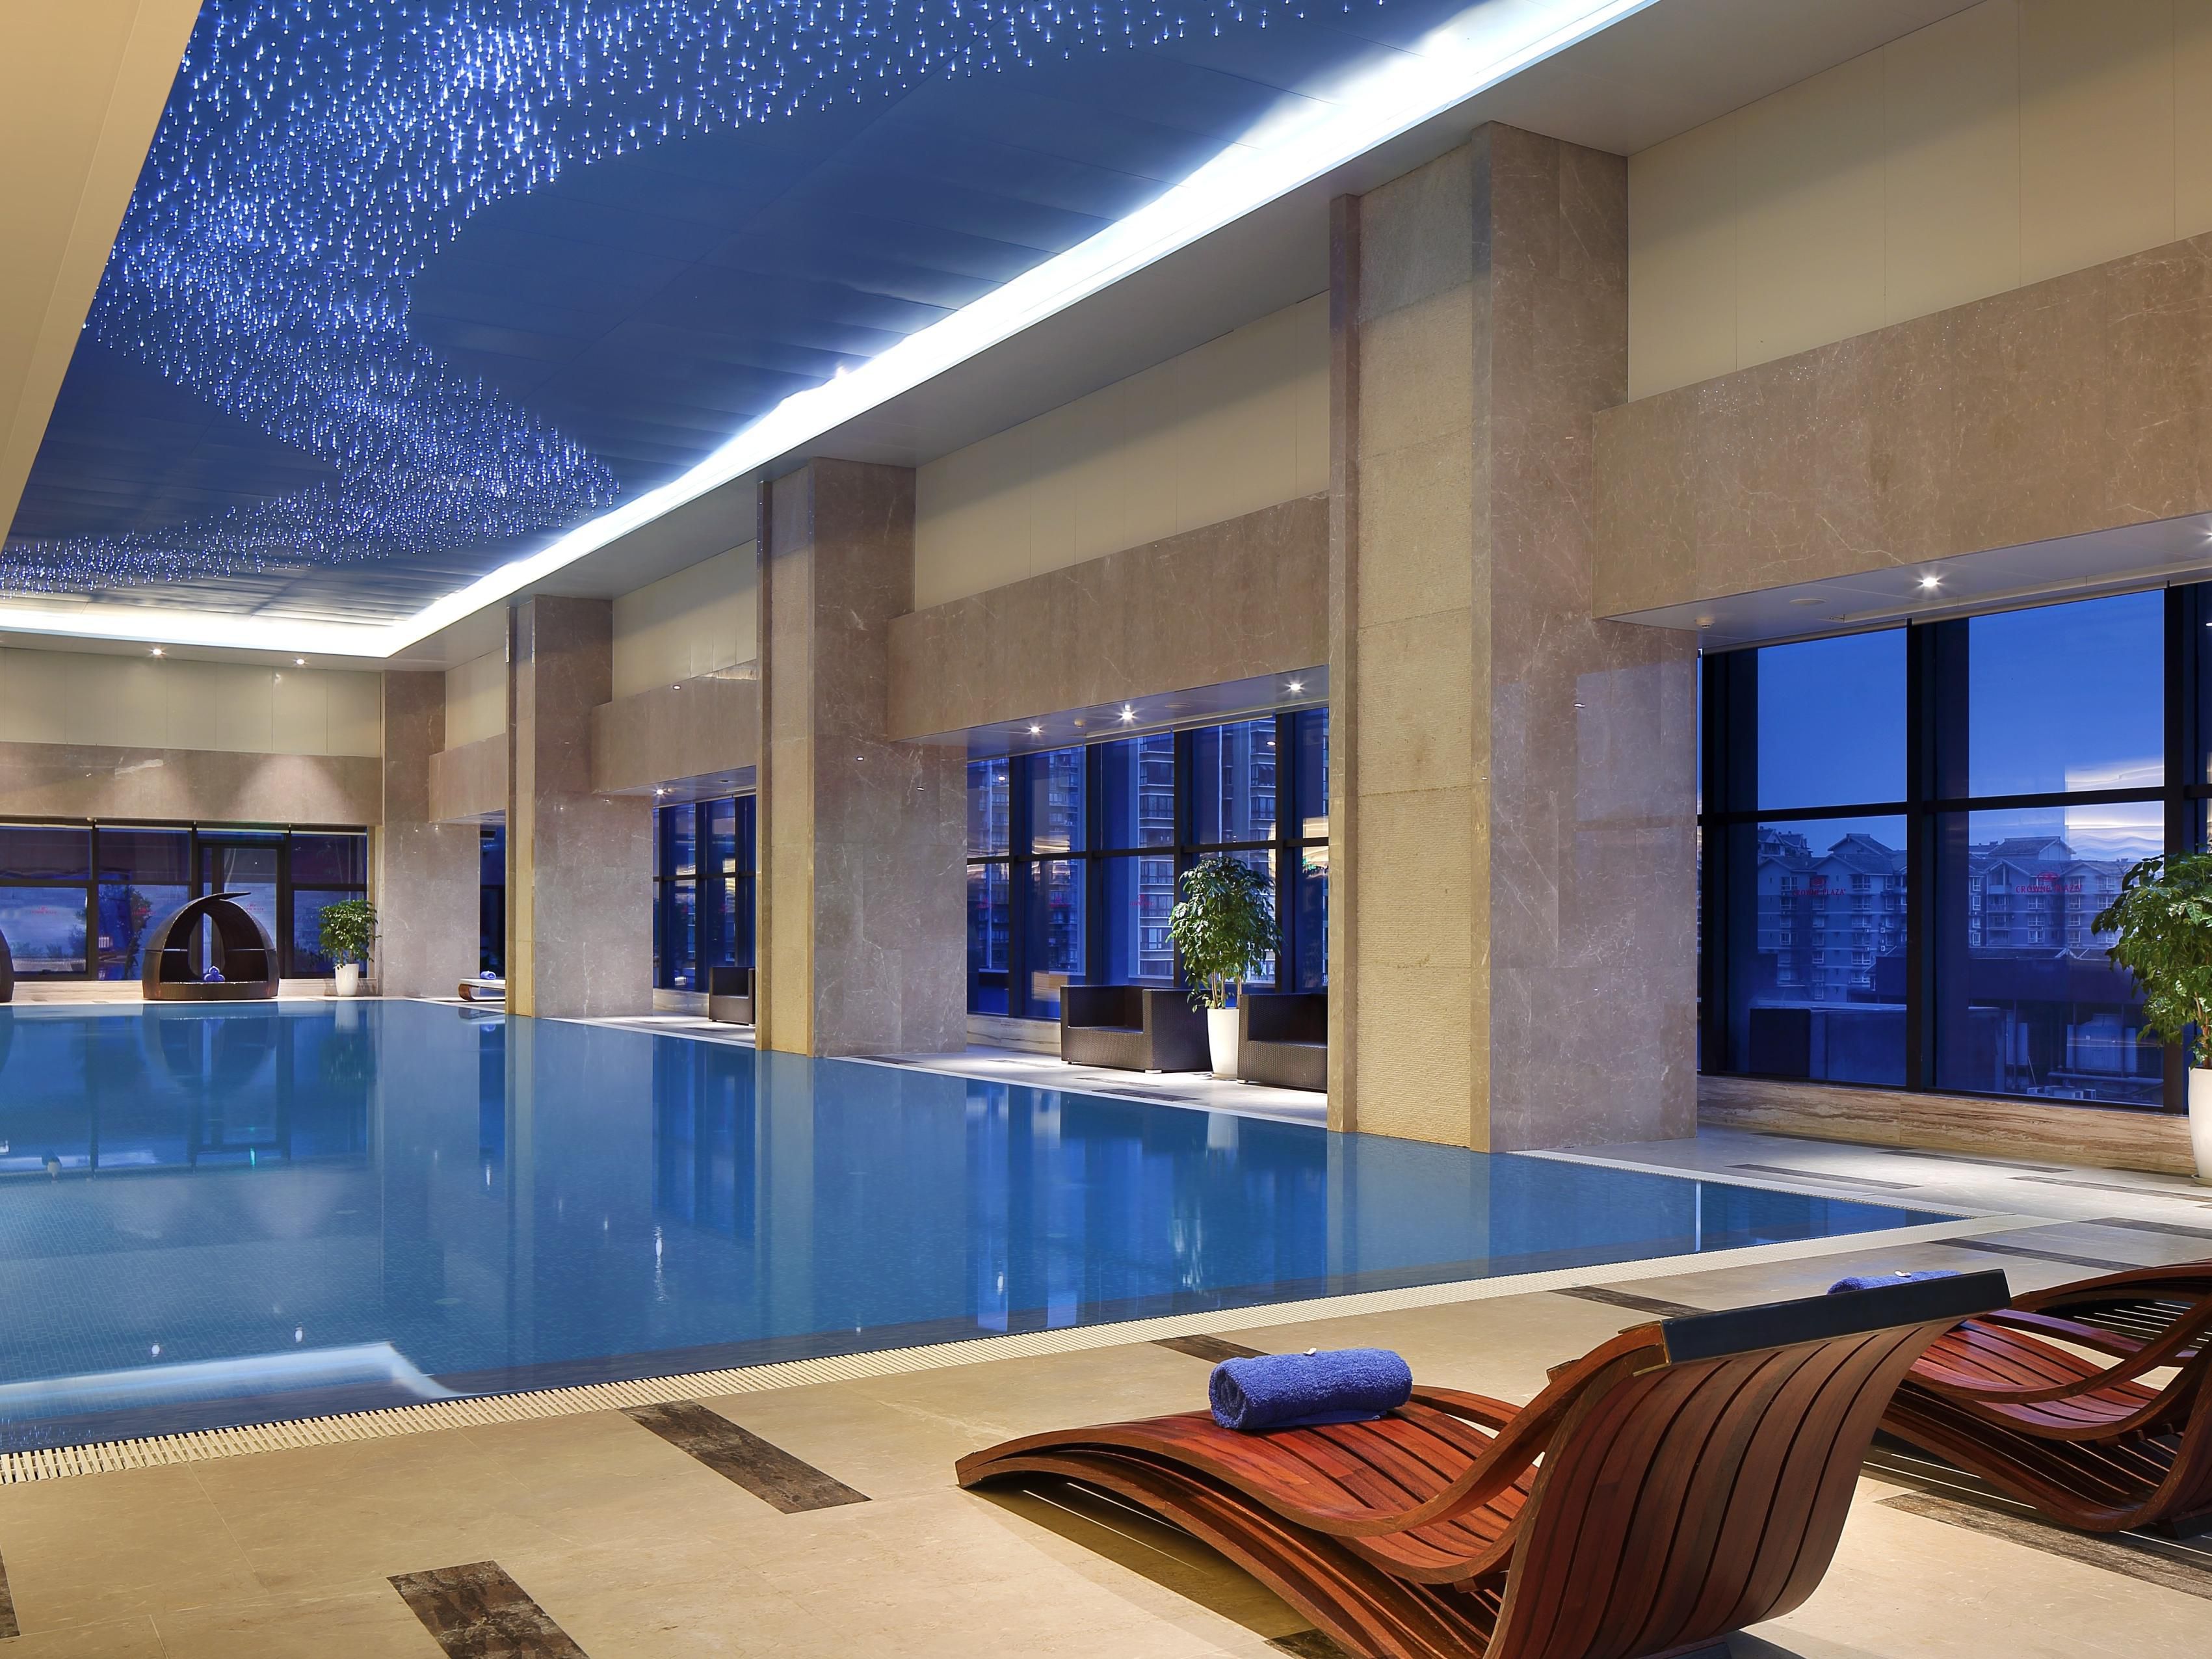 Our heated, indoor swimming pool offers constant water temperature and is ideal for lap swim or just splashing around.